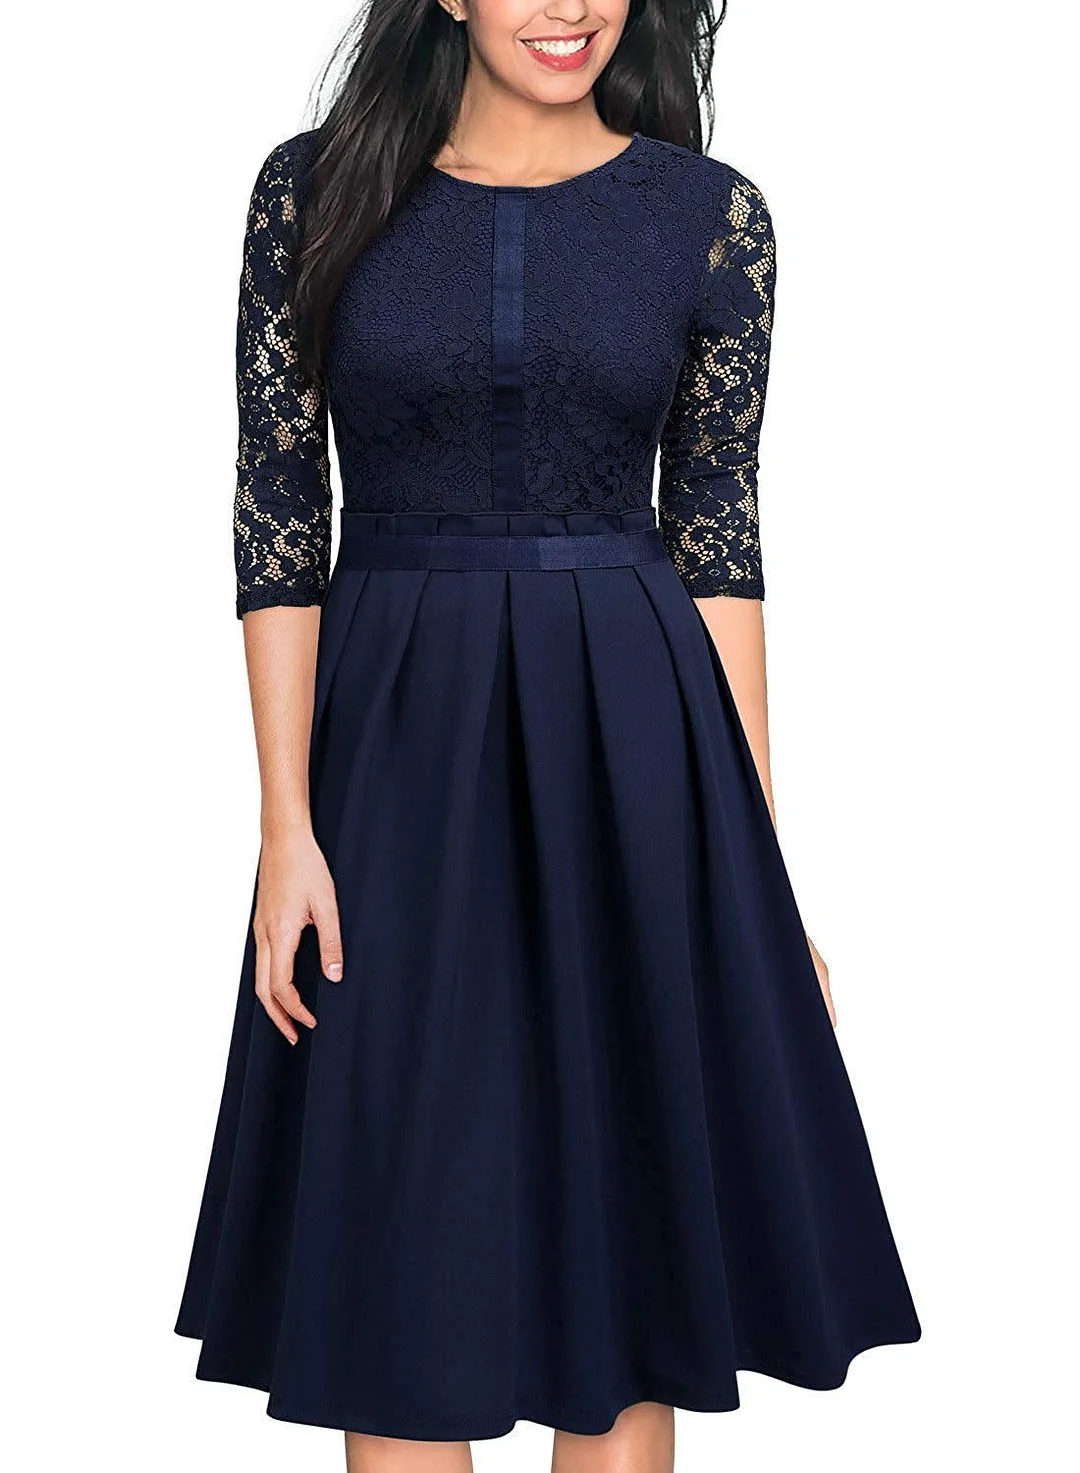 Women's Vintage Half Sleeve Floral Lace Cocktail Party Pleated Swing Dress